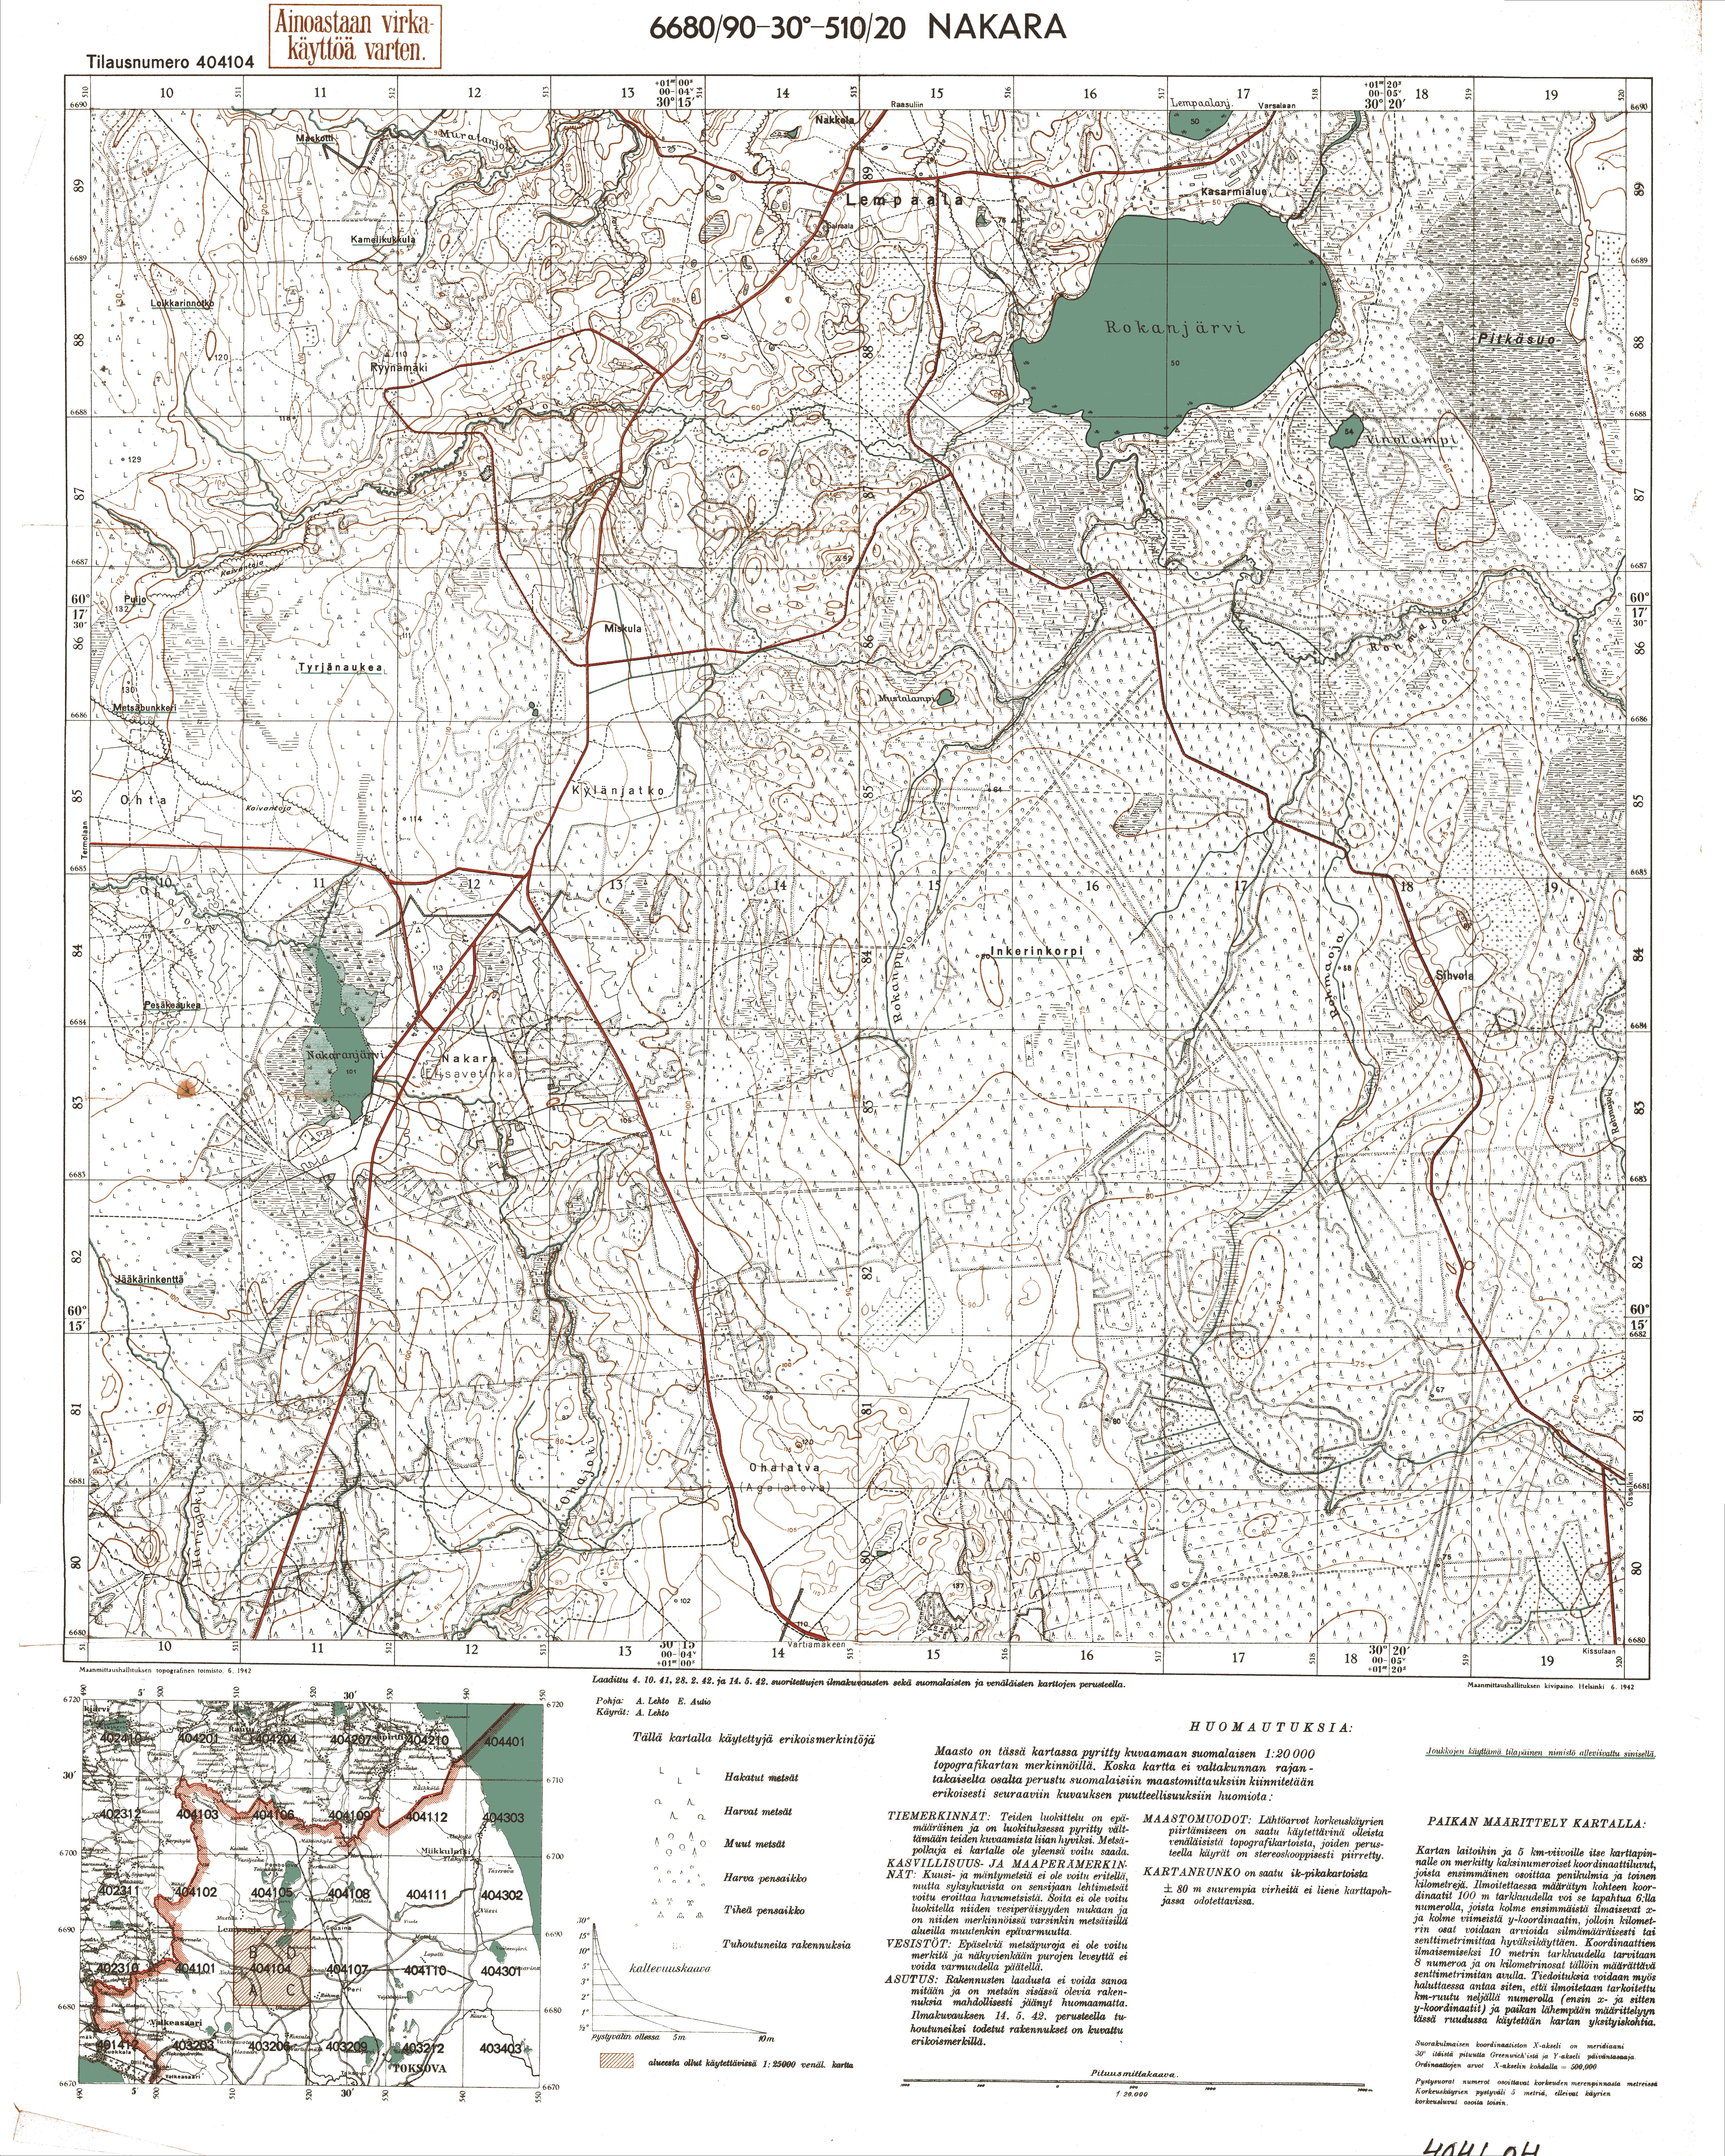 Jelizavetinka. Nakara. Topografikartta 404104. Topographic map from 1936. Use the zooming tool to explore in higher level of detail. Obtain as a quality print or high resolution image